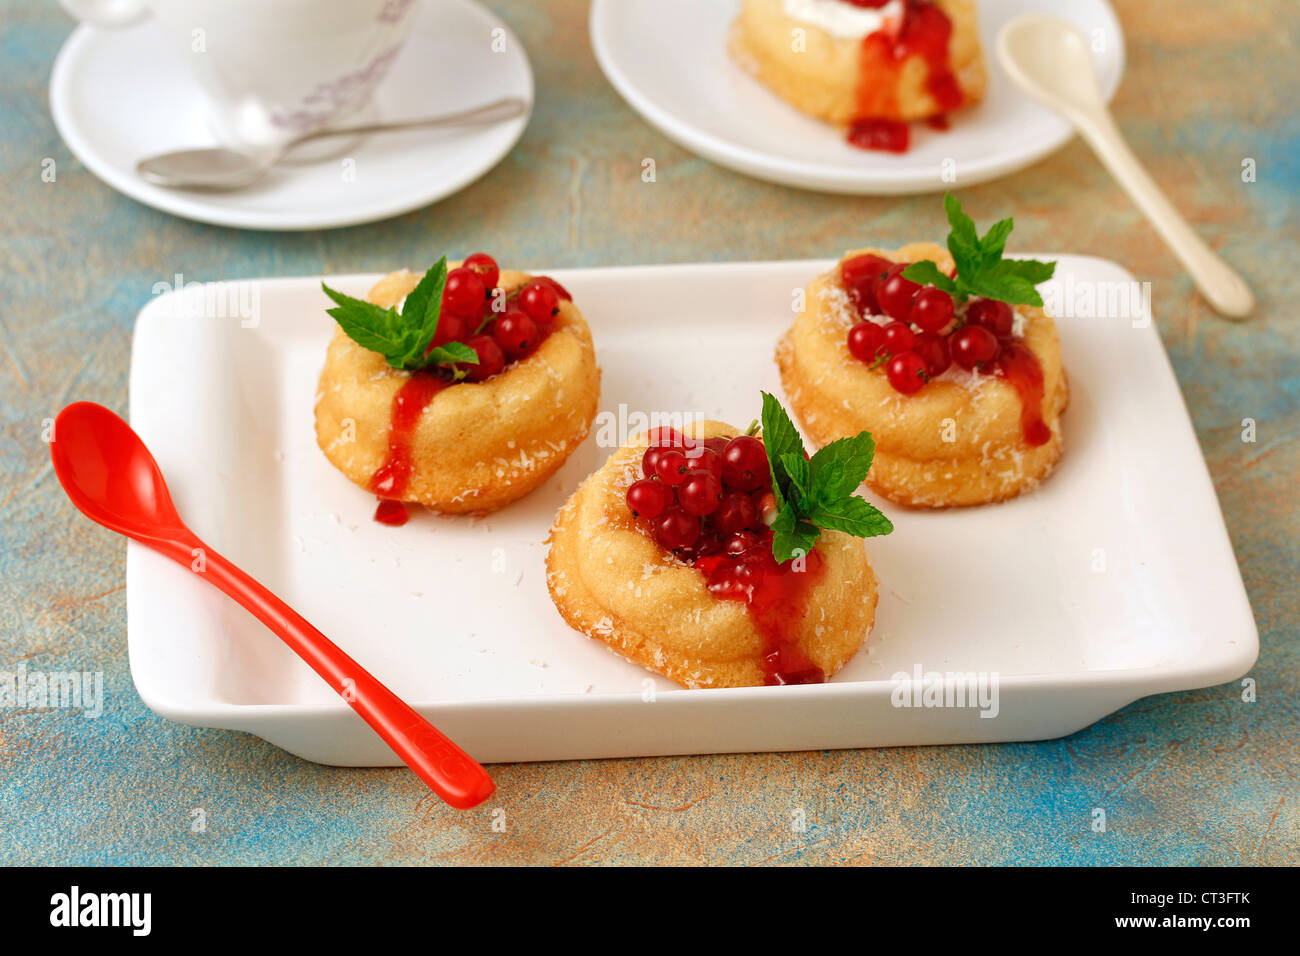 Little sponge cakes with cream and red currants. Recipe available, Stock Photo